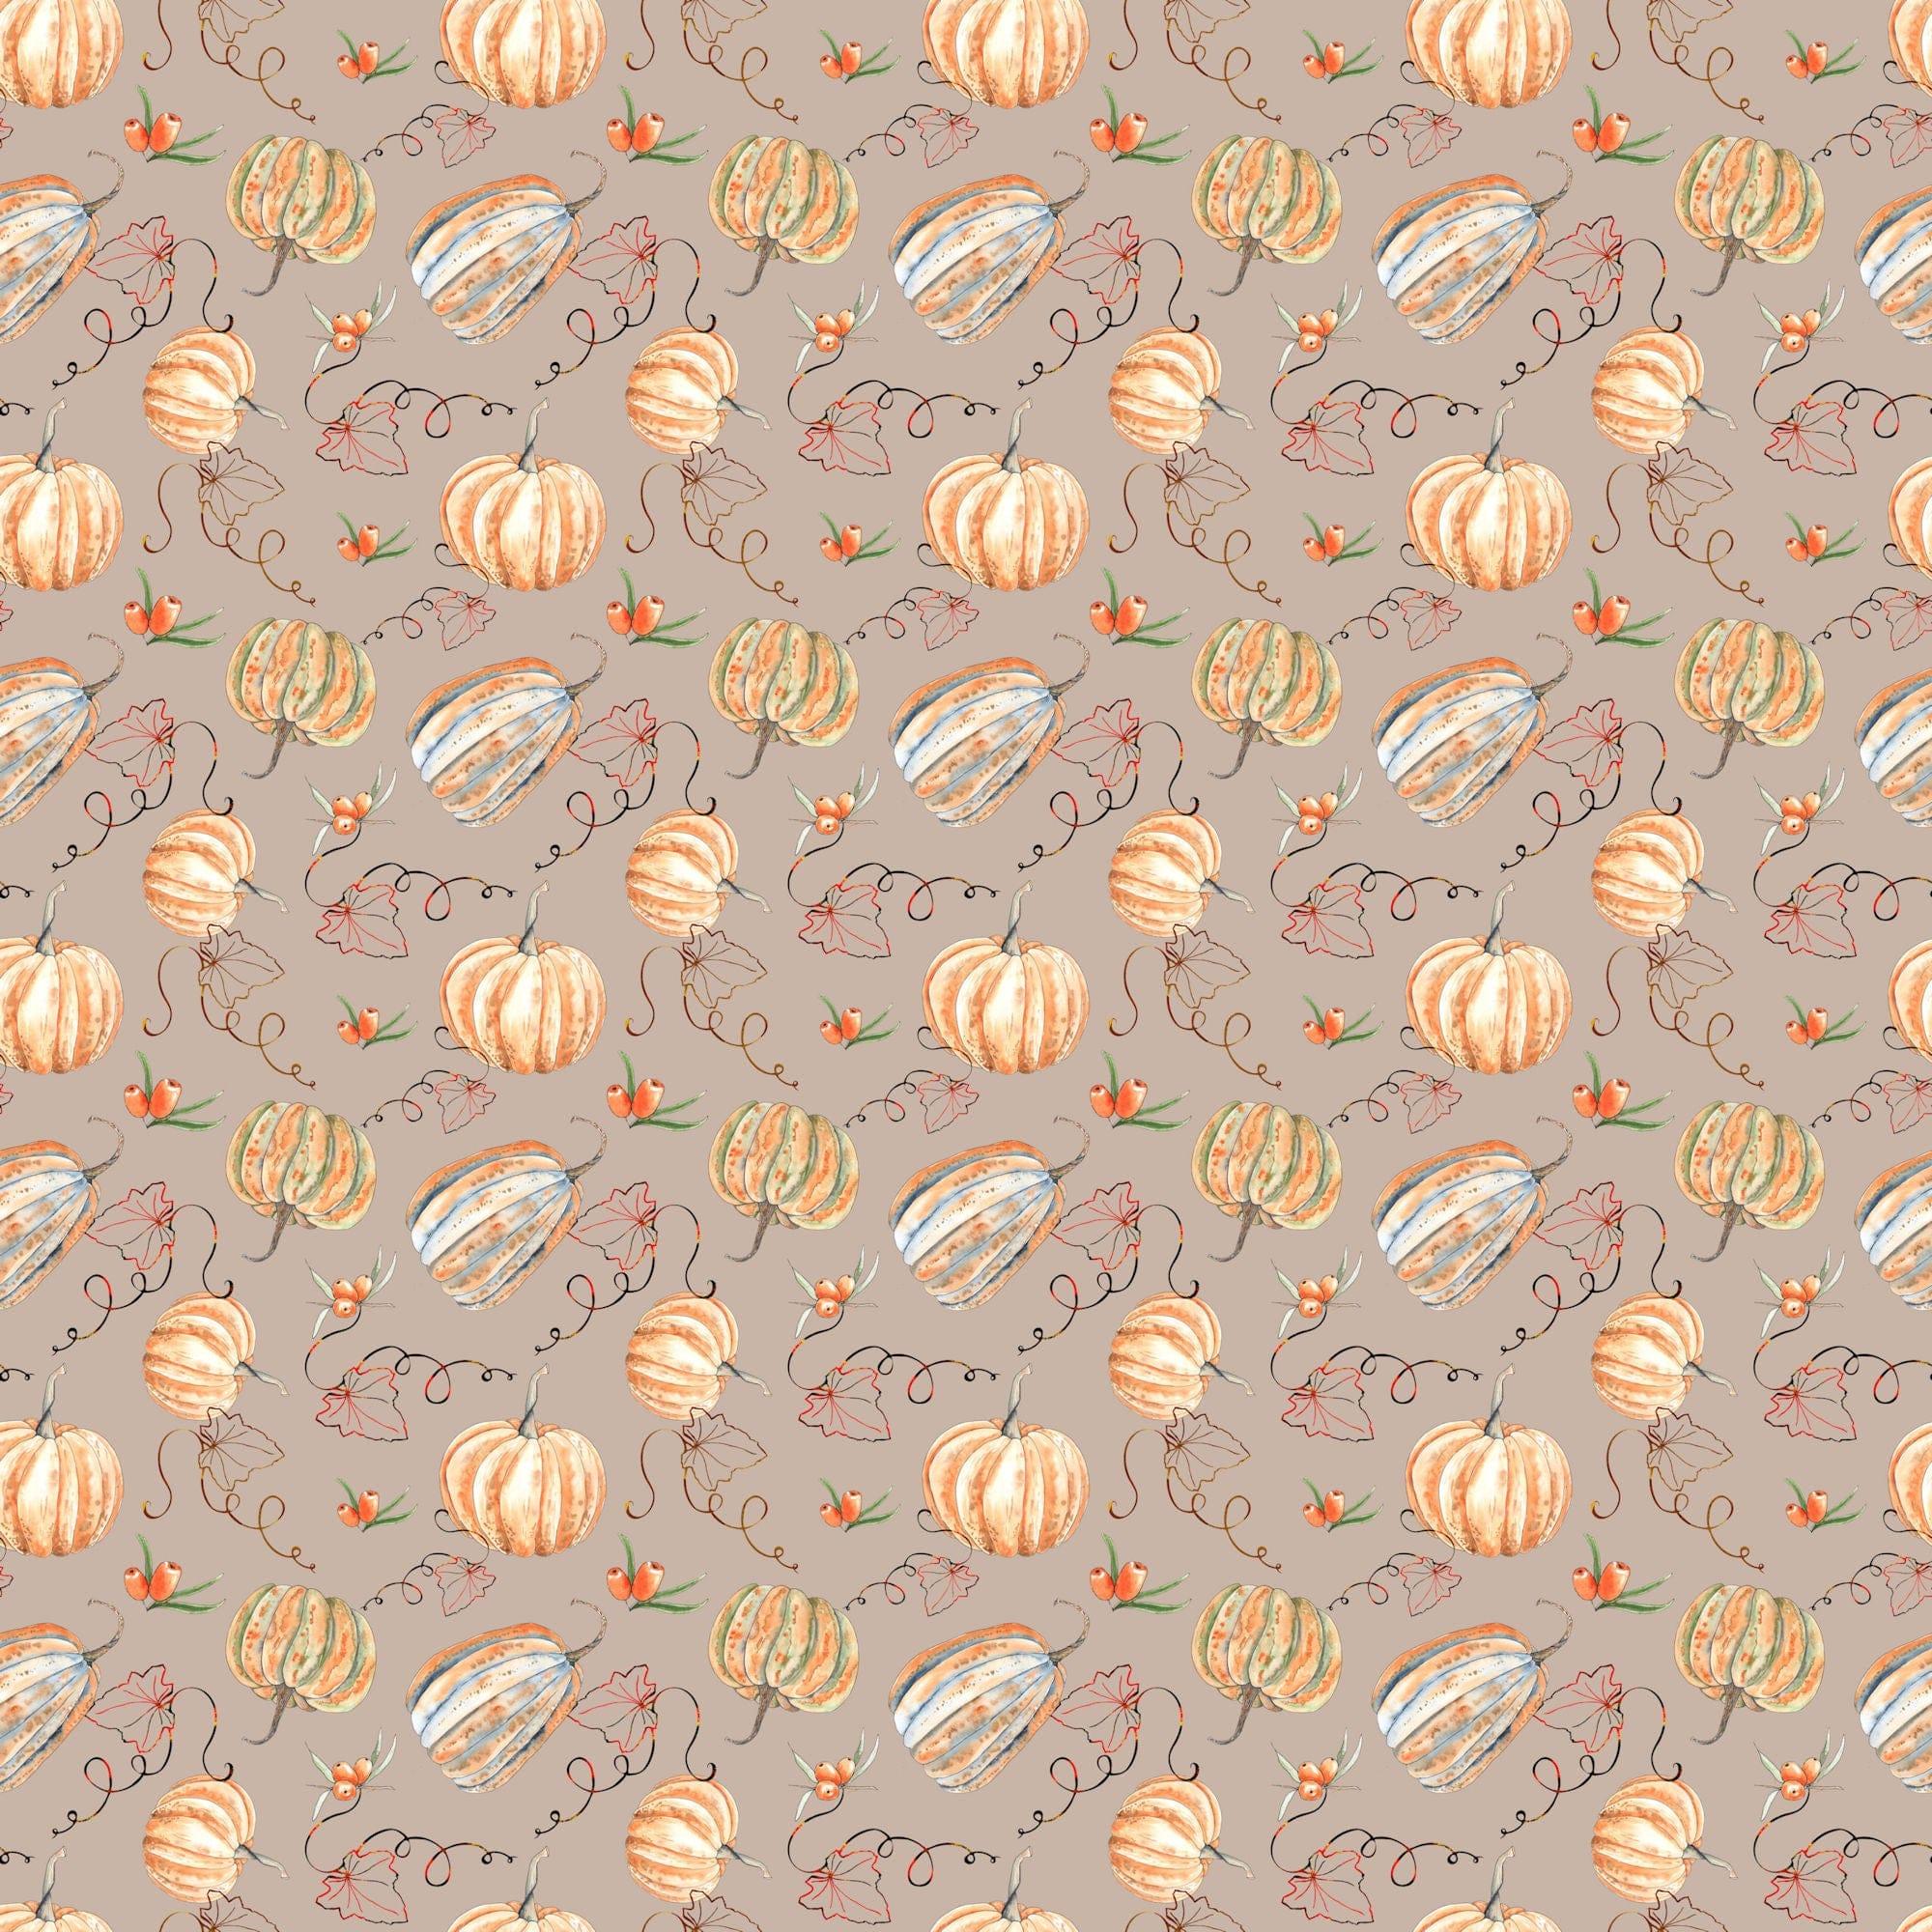 Pumpkin Patch Collection Pretty Pumpkins 12 x 12 Double-Sided Scrapbook Paper by SSC Designs - Scrapbook Supply Companies